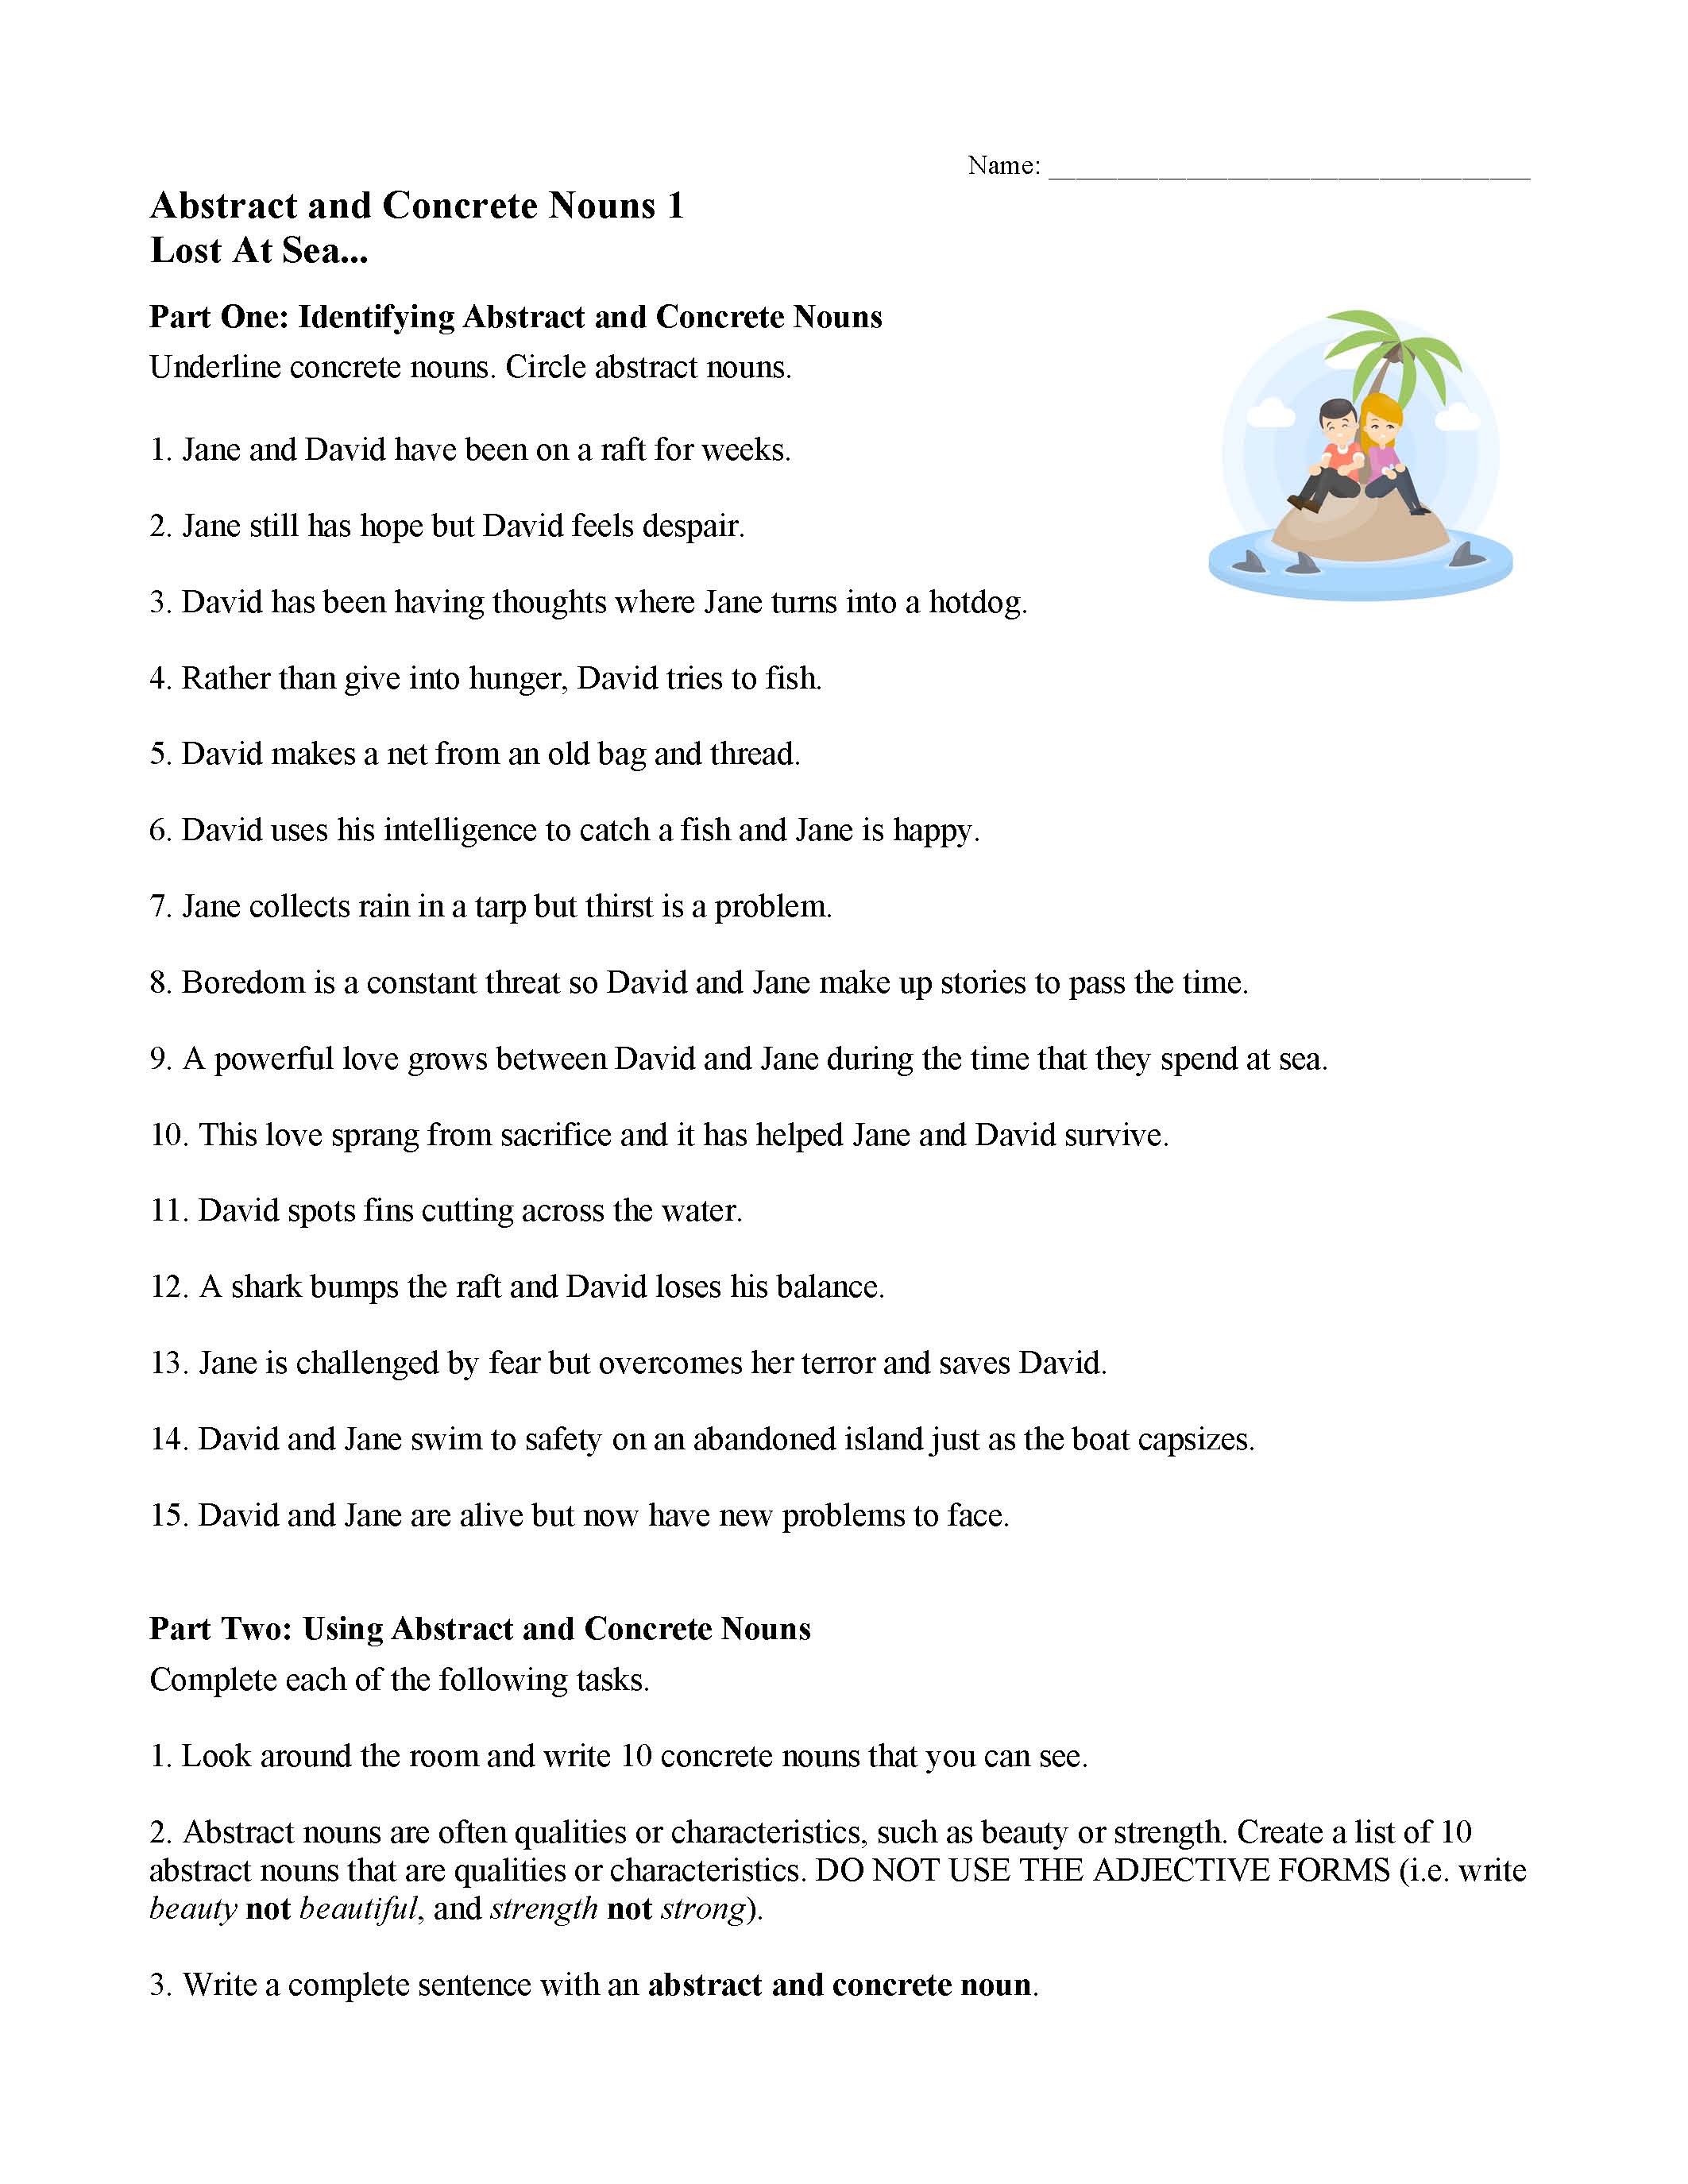 concrete-and-abstract-nouns-worksheet-lost-at-sea-parts-of-speech-activity